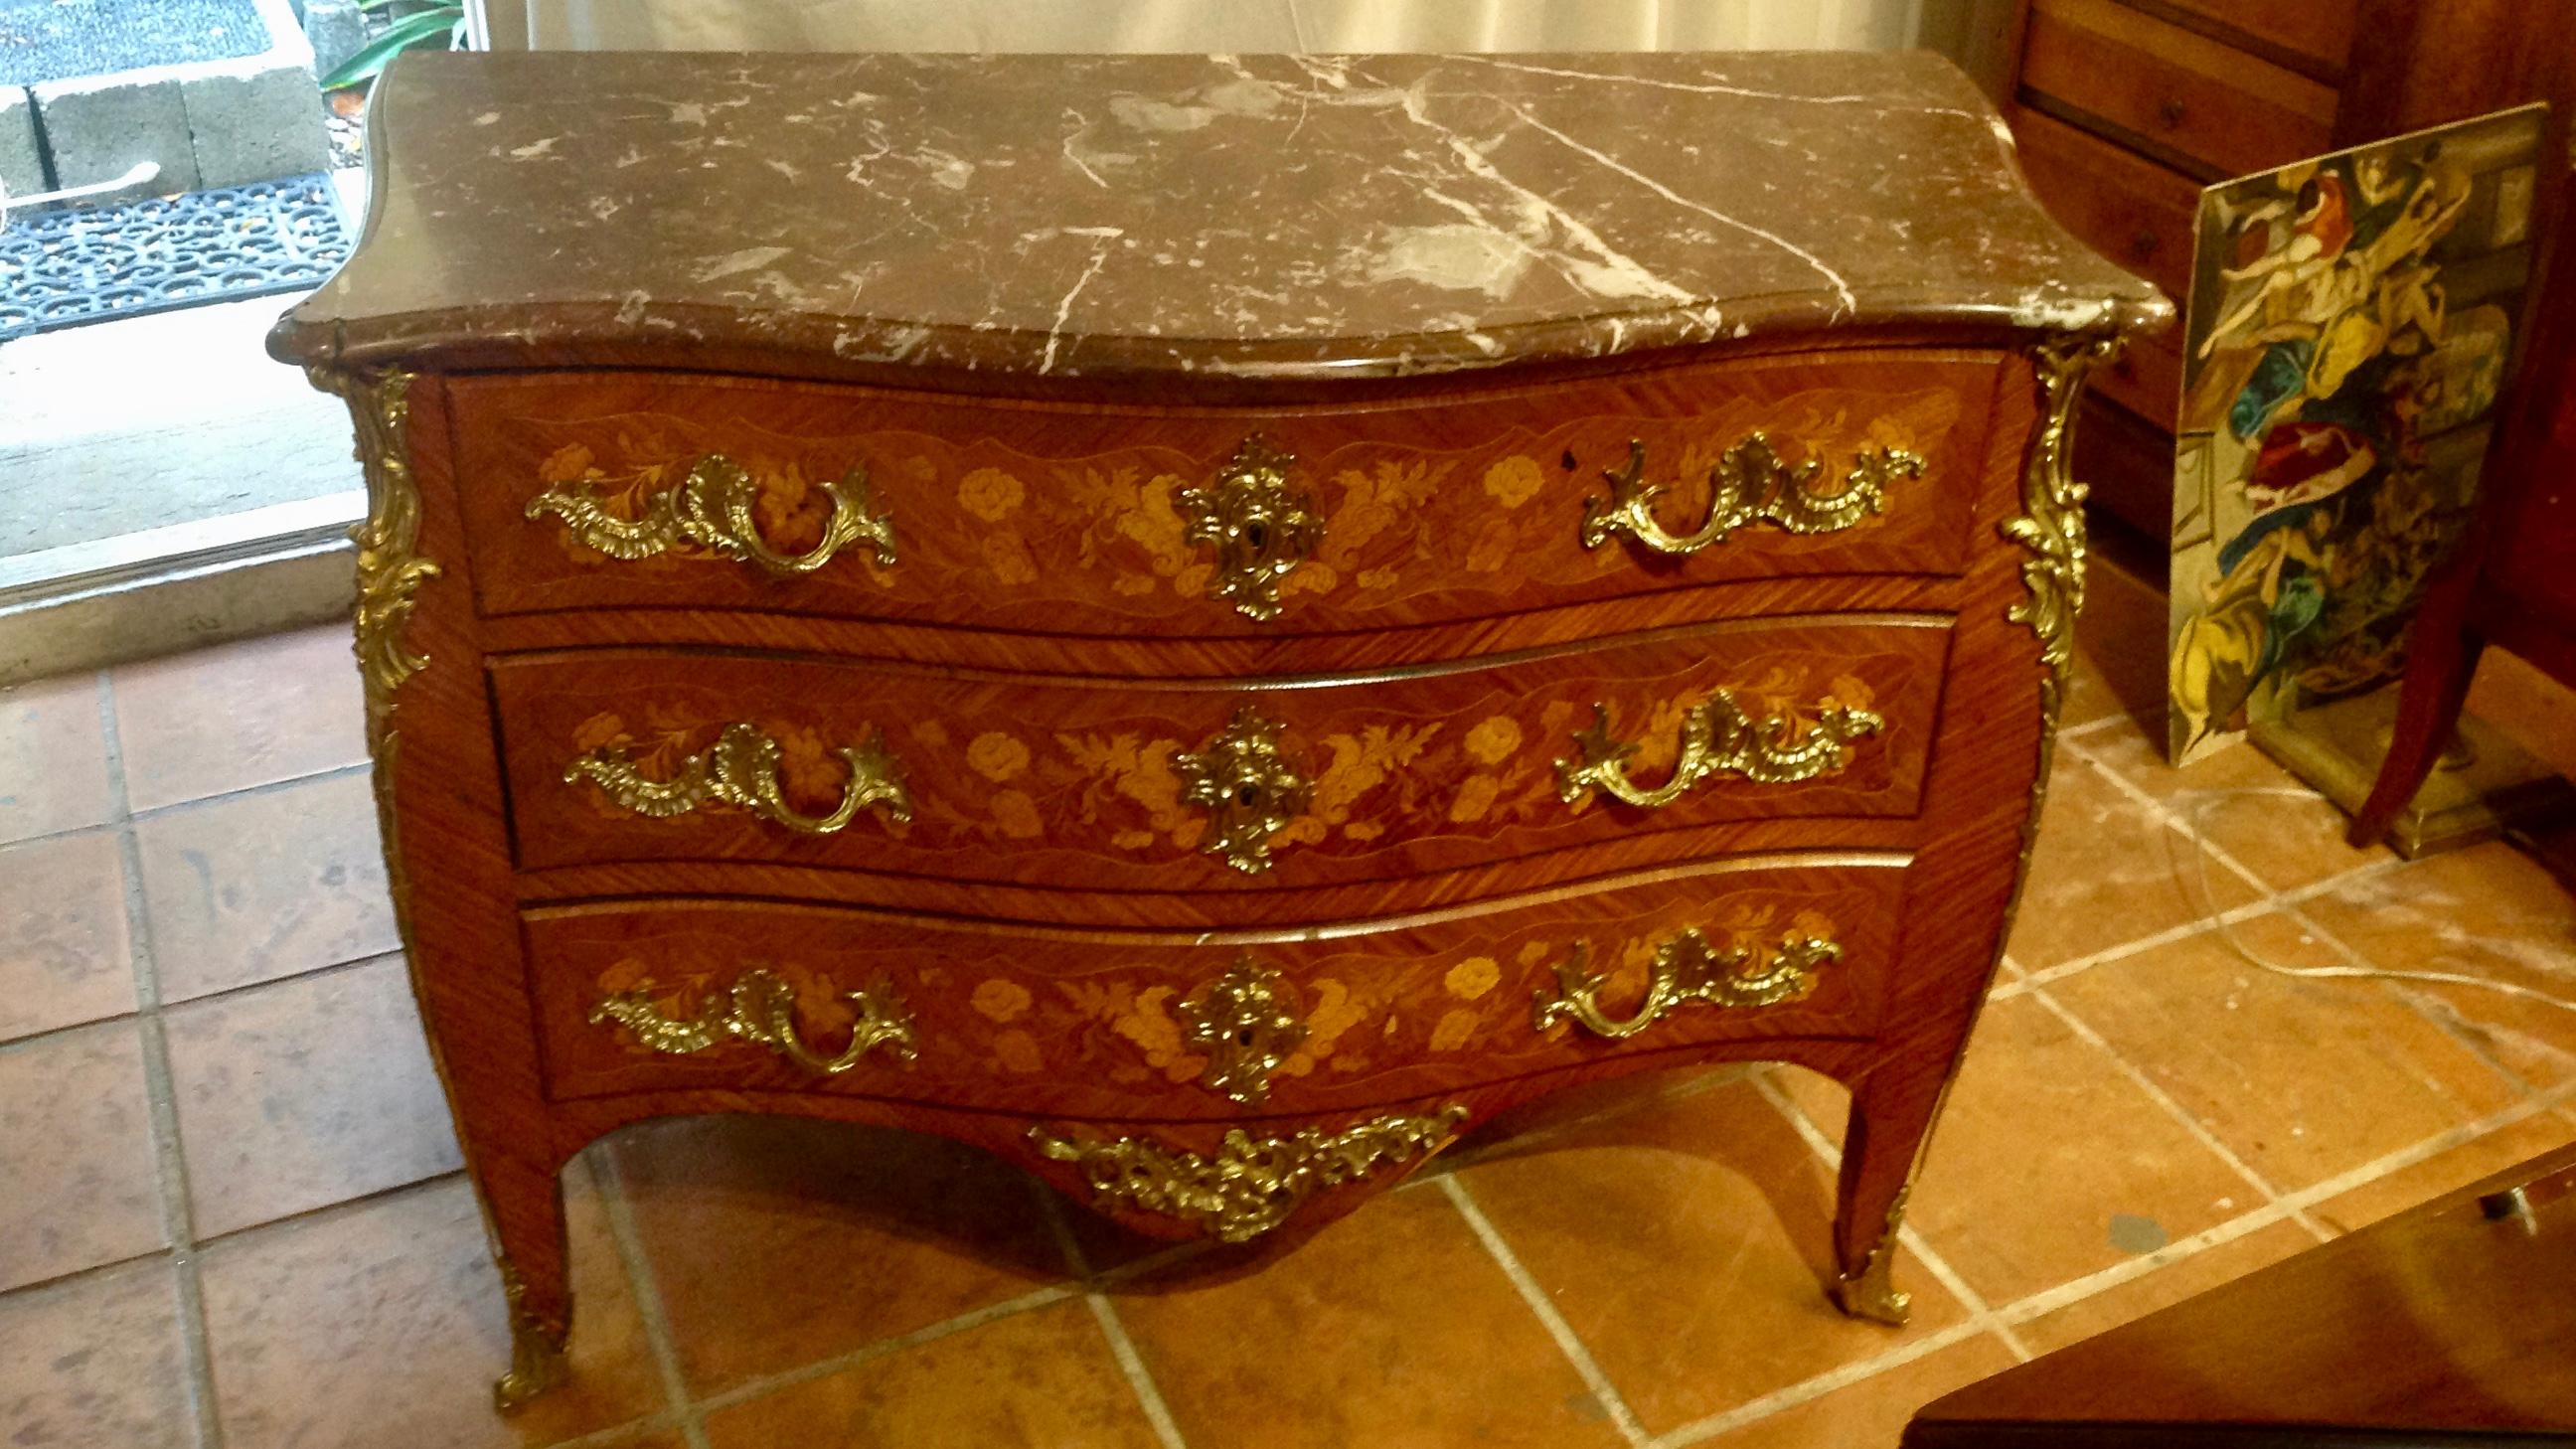 Superb quality antique Louis XV style ormolu-mounted commode. Original patina with very good quality ormolu. The drawers are all solid oak with dovetail joints.
Original marble in very good condition.